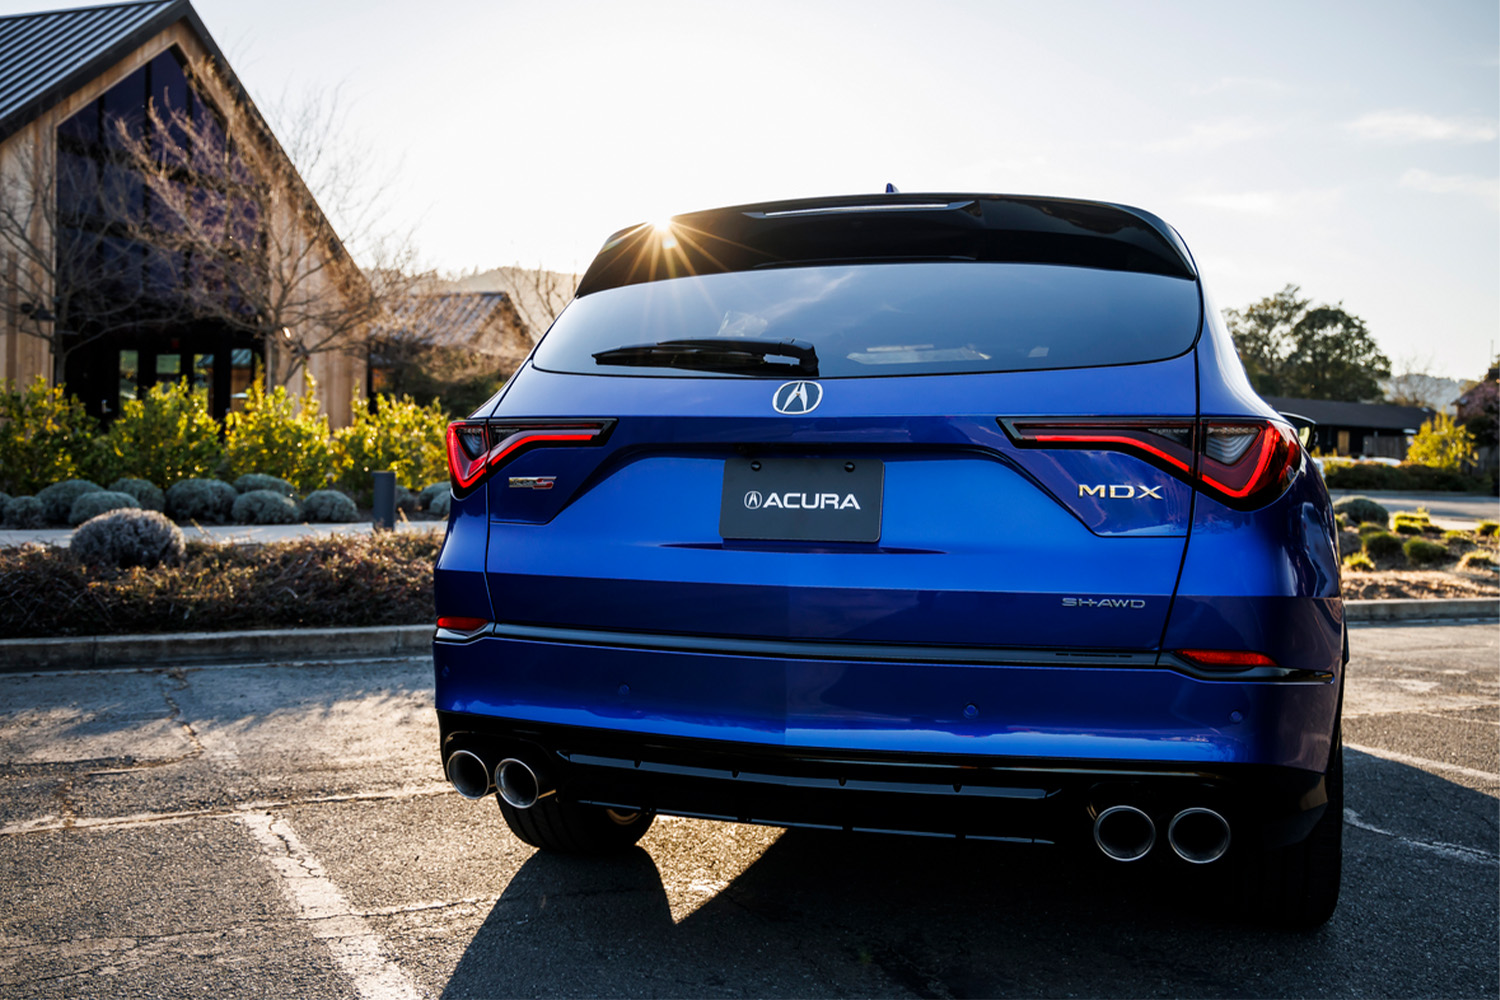 Rear view of the Acura MDX Type S